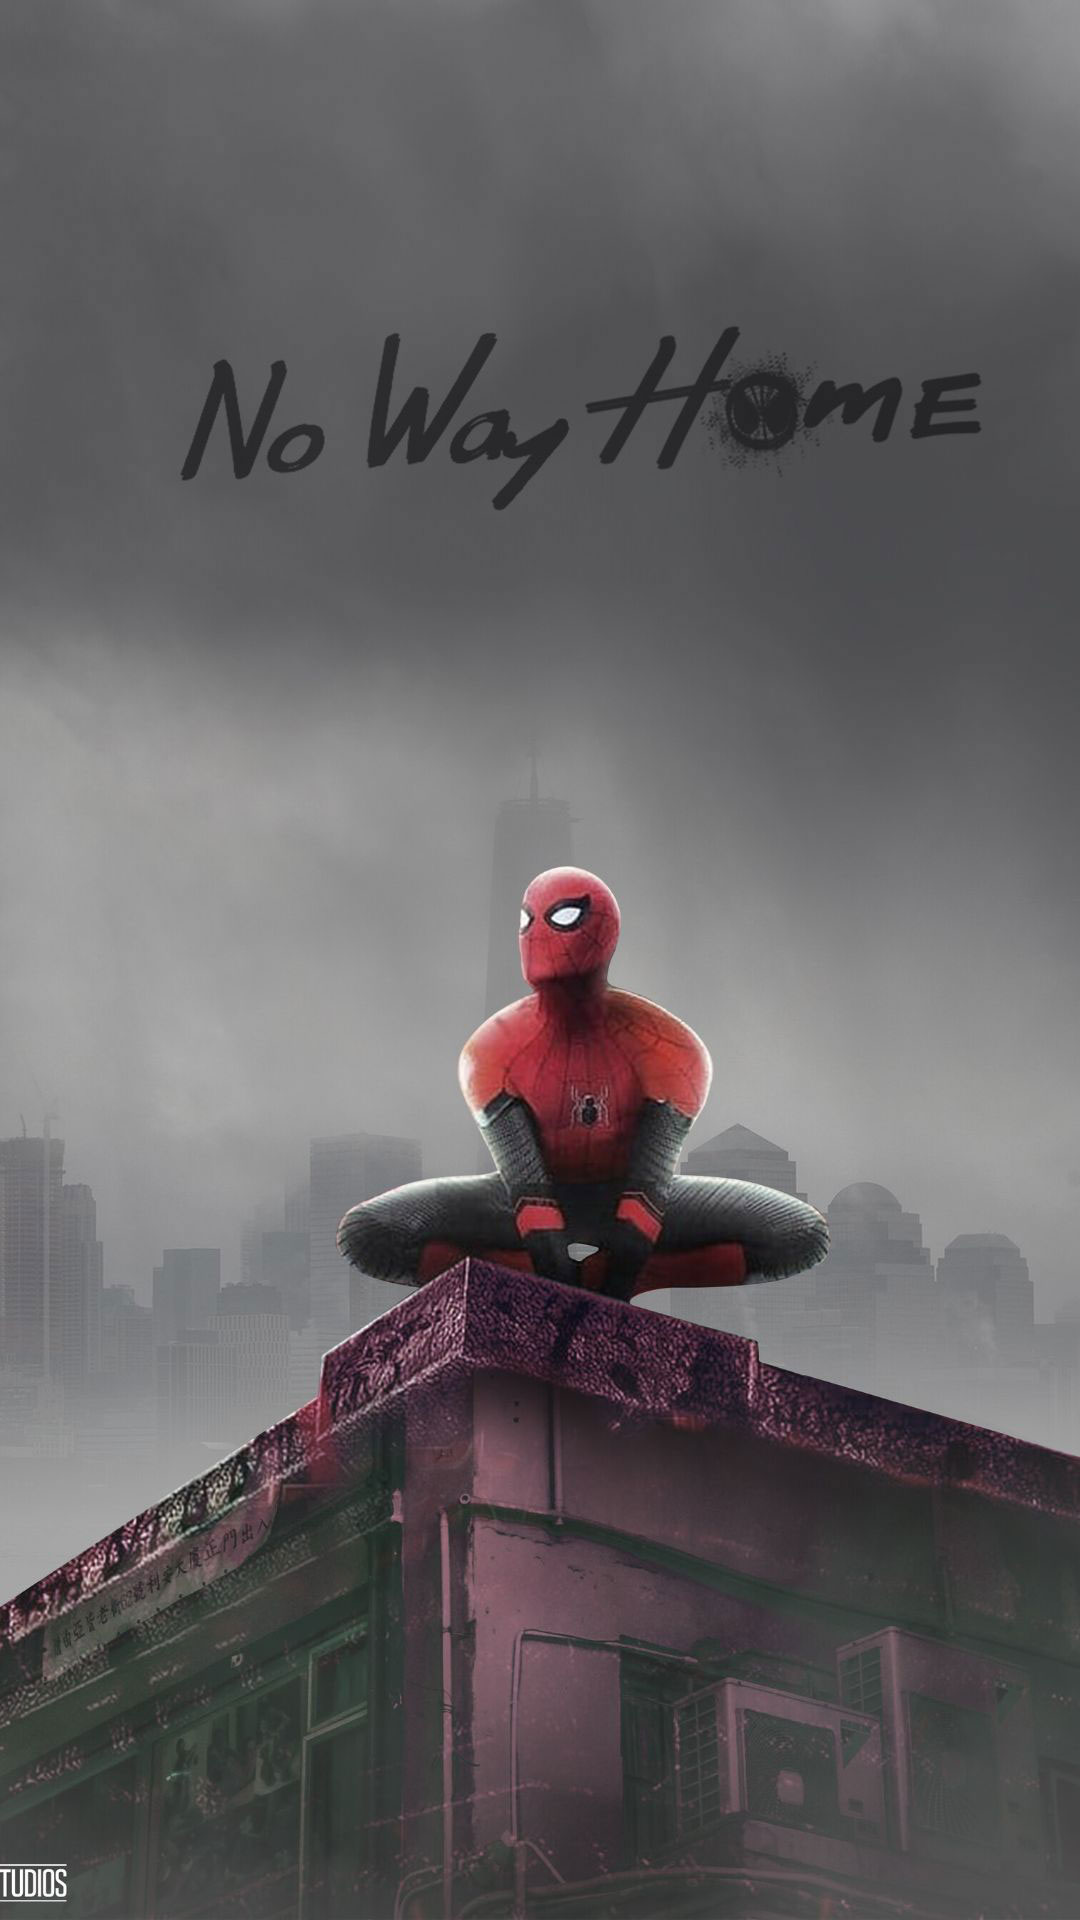 Spiderman No Way Home Hd Wallpaper 4k For Mobile